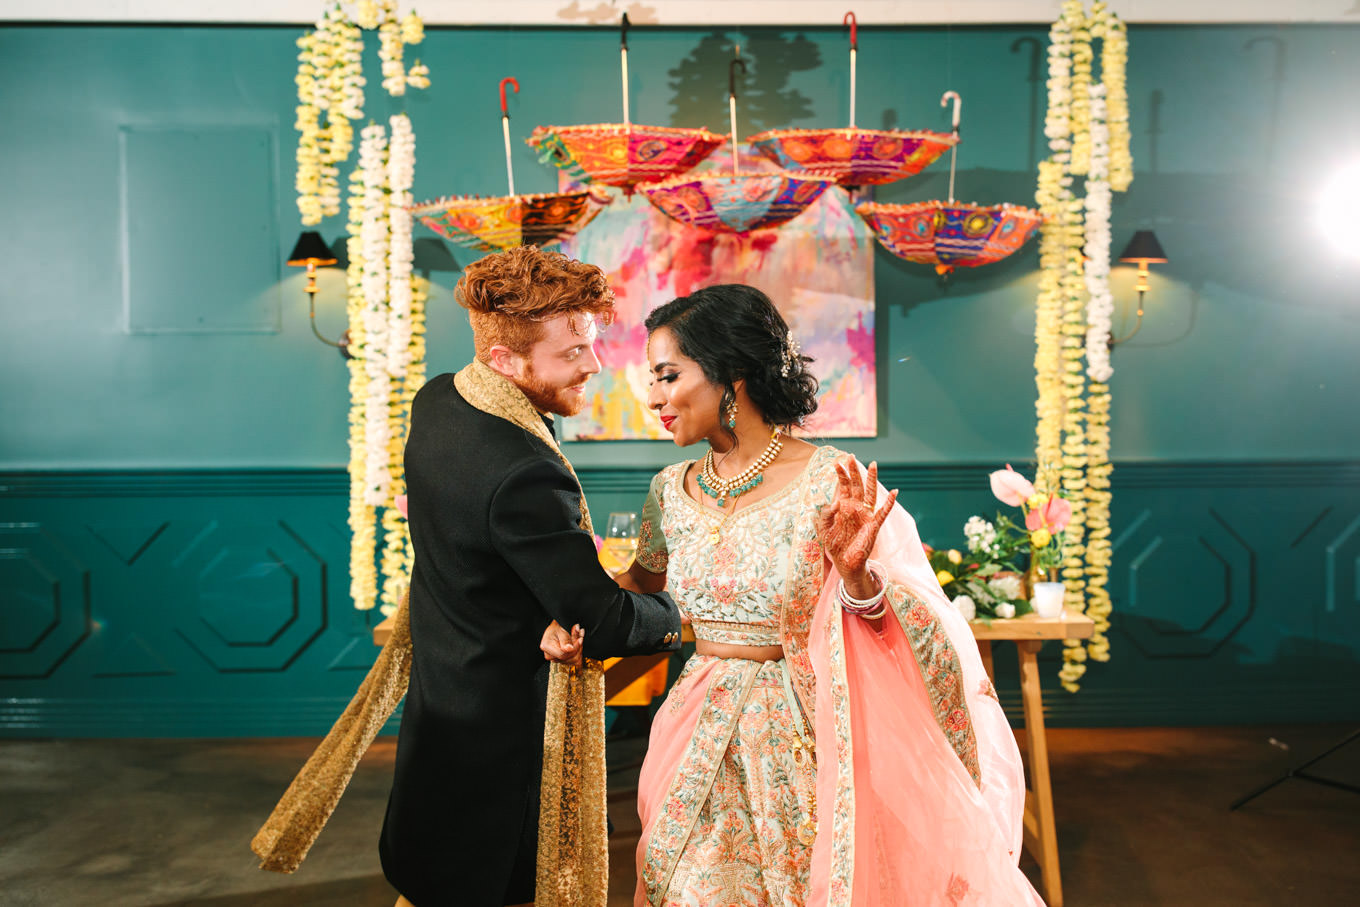 Bride and groom dancing during wedding reception. Two Disney artists create a unique and colorful Indian Fusion wedding at The Fig House Los Angeles, featured on Green Wedding Shoes. | Colorful and elevated wedding inspiration for fun-loving couples in Southern California | #indianwedding #indianfusionwedding #thefighouse #losangeleswedding   Source: Mary Costa Photography | Los Angeles